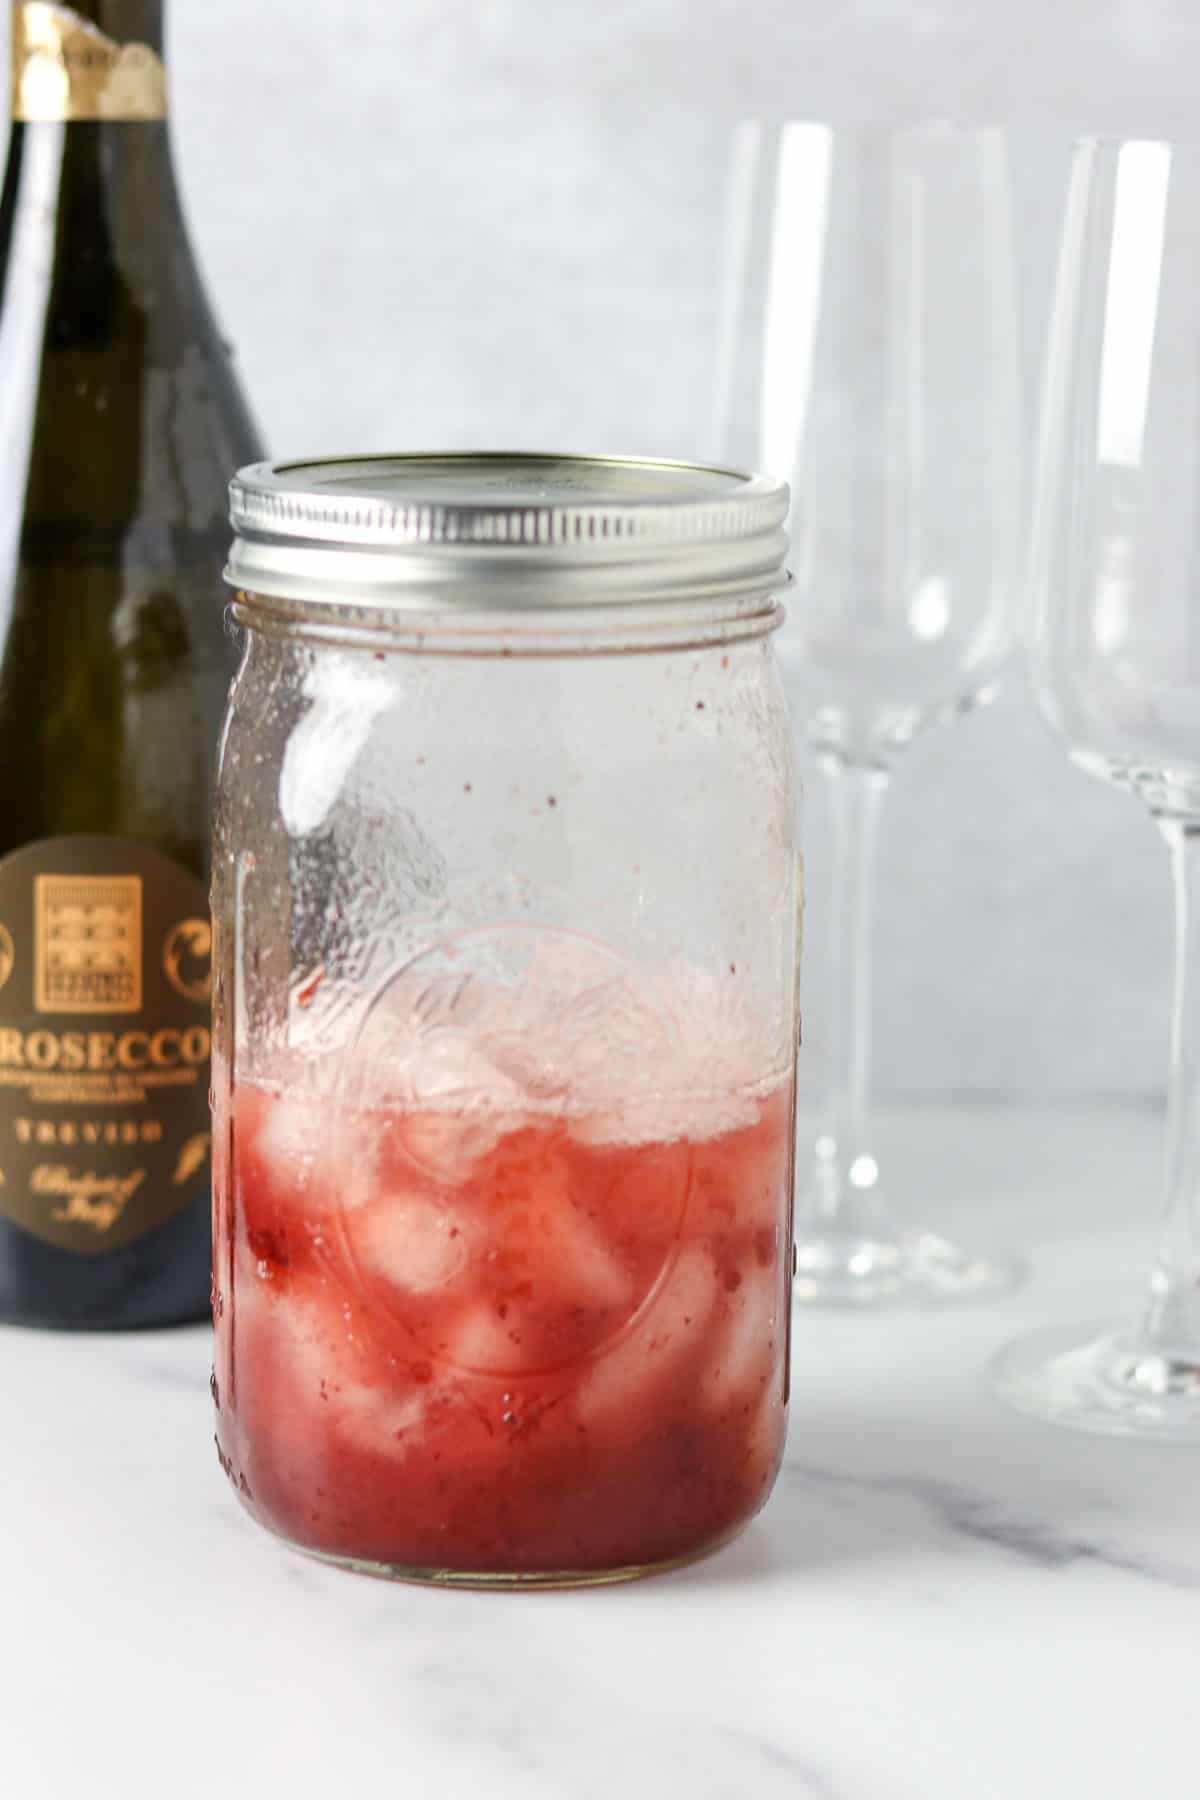 Mason jar filled with ice and a cocktail mixture next to champagne glasses and a bottle of Prosecco.